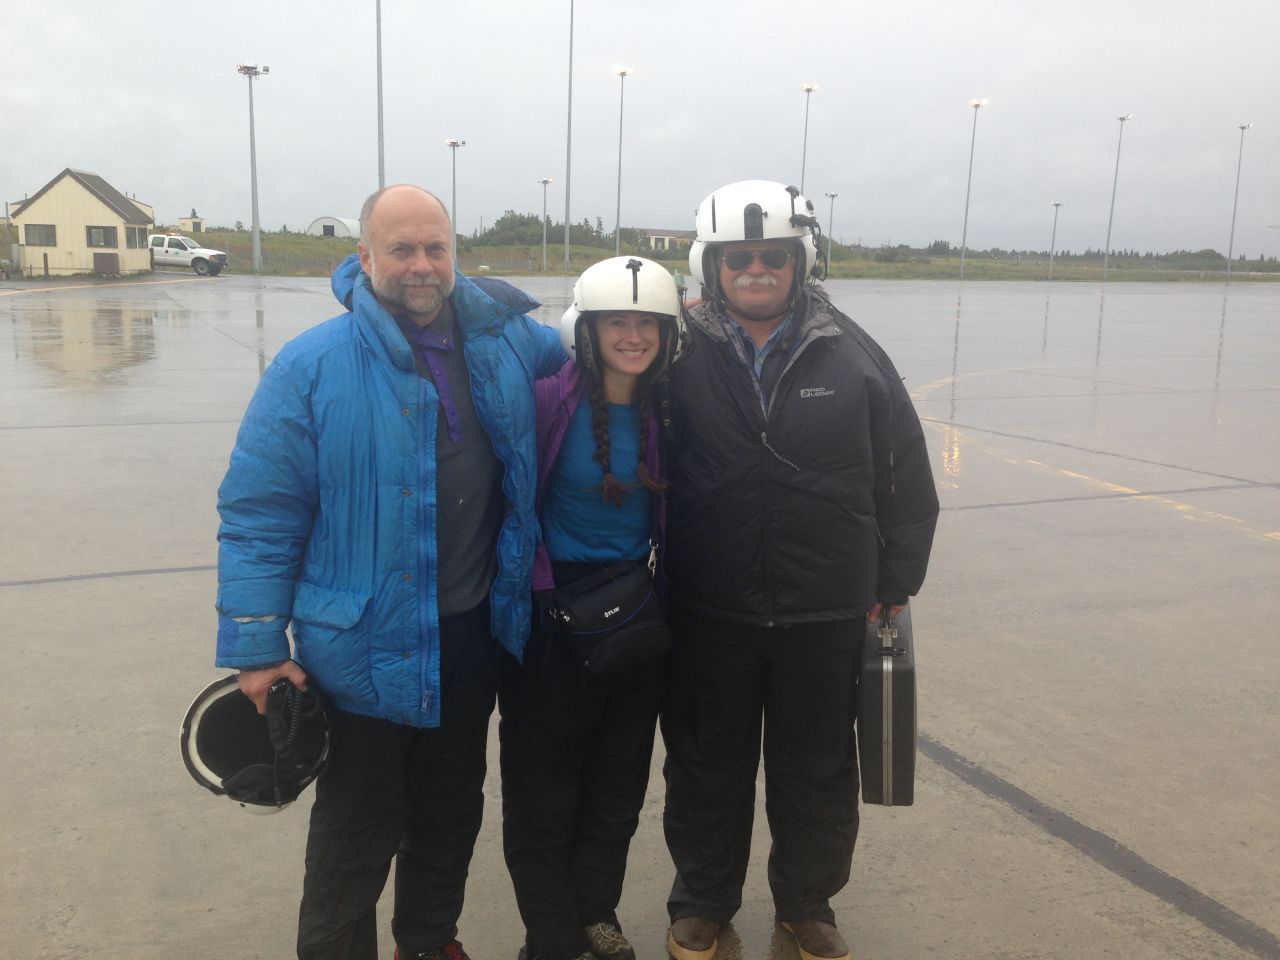 Paskievitch, Lopez and Egli are all smiles after they were picked up Friday by the Alaska Air Guard Rescue team and return to King Salmon. The three stayed in sleeping bags inside the helicopter except to answer nature's calls and shoot a flare at the request of the rescuers